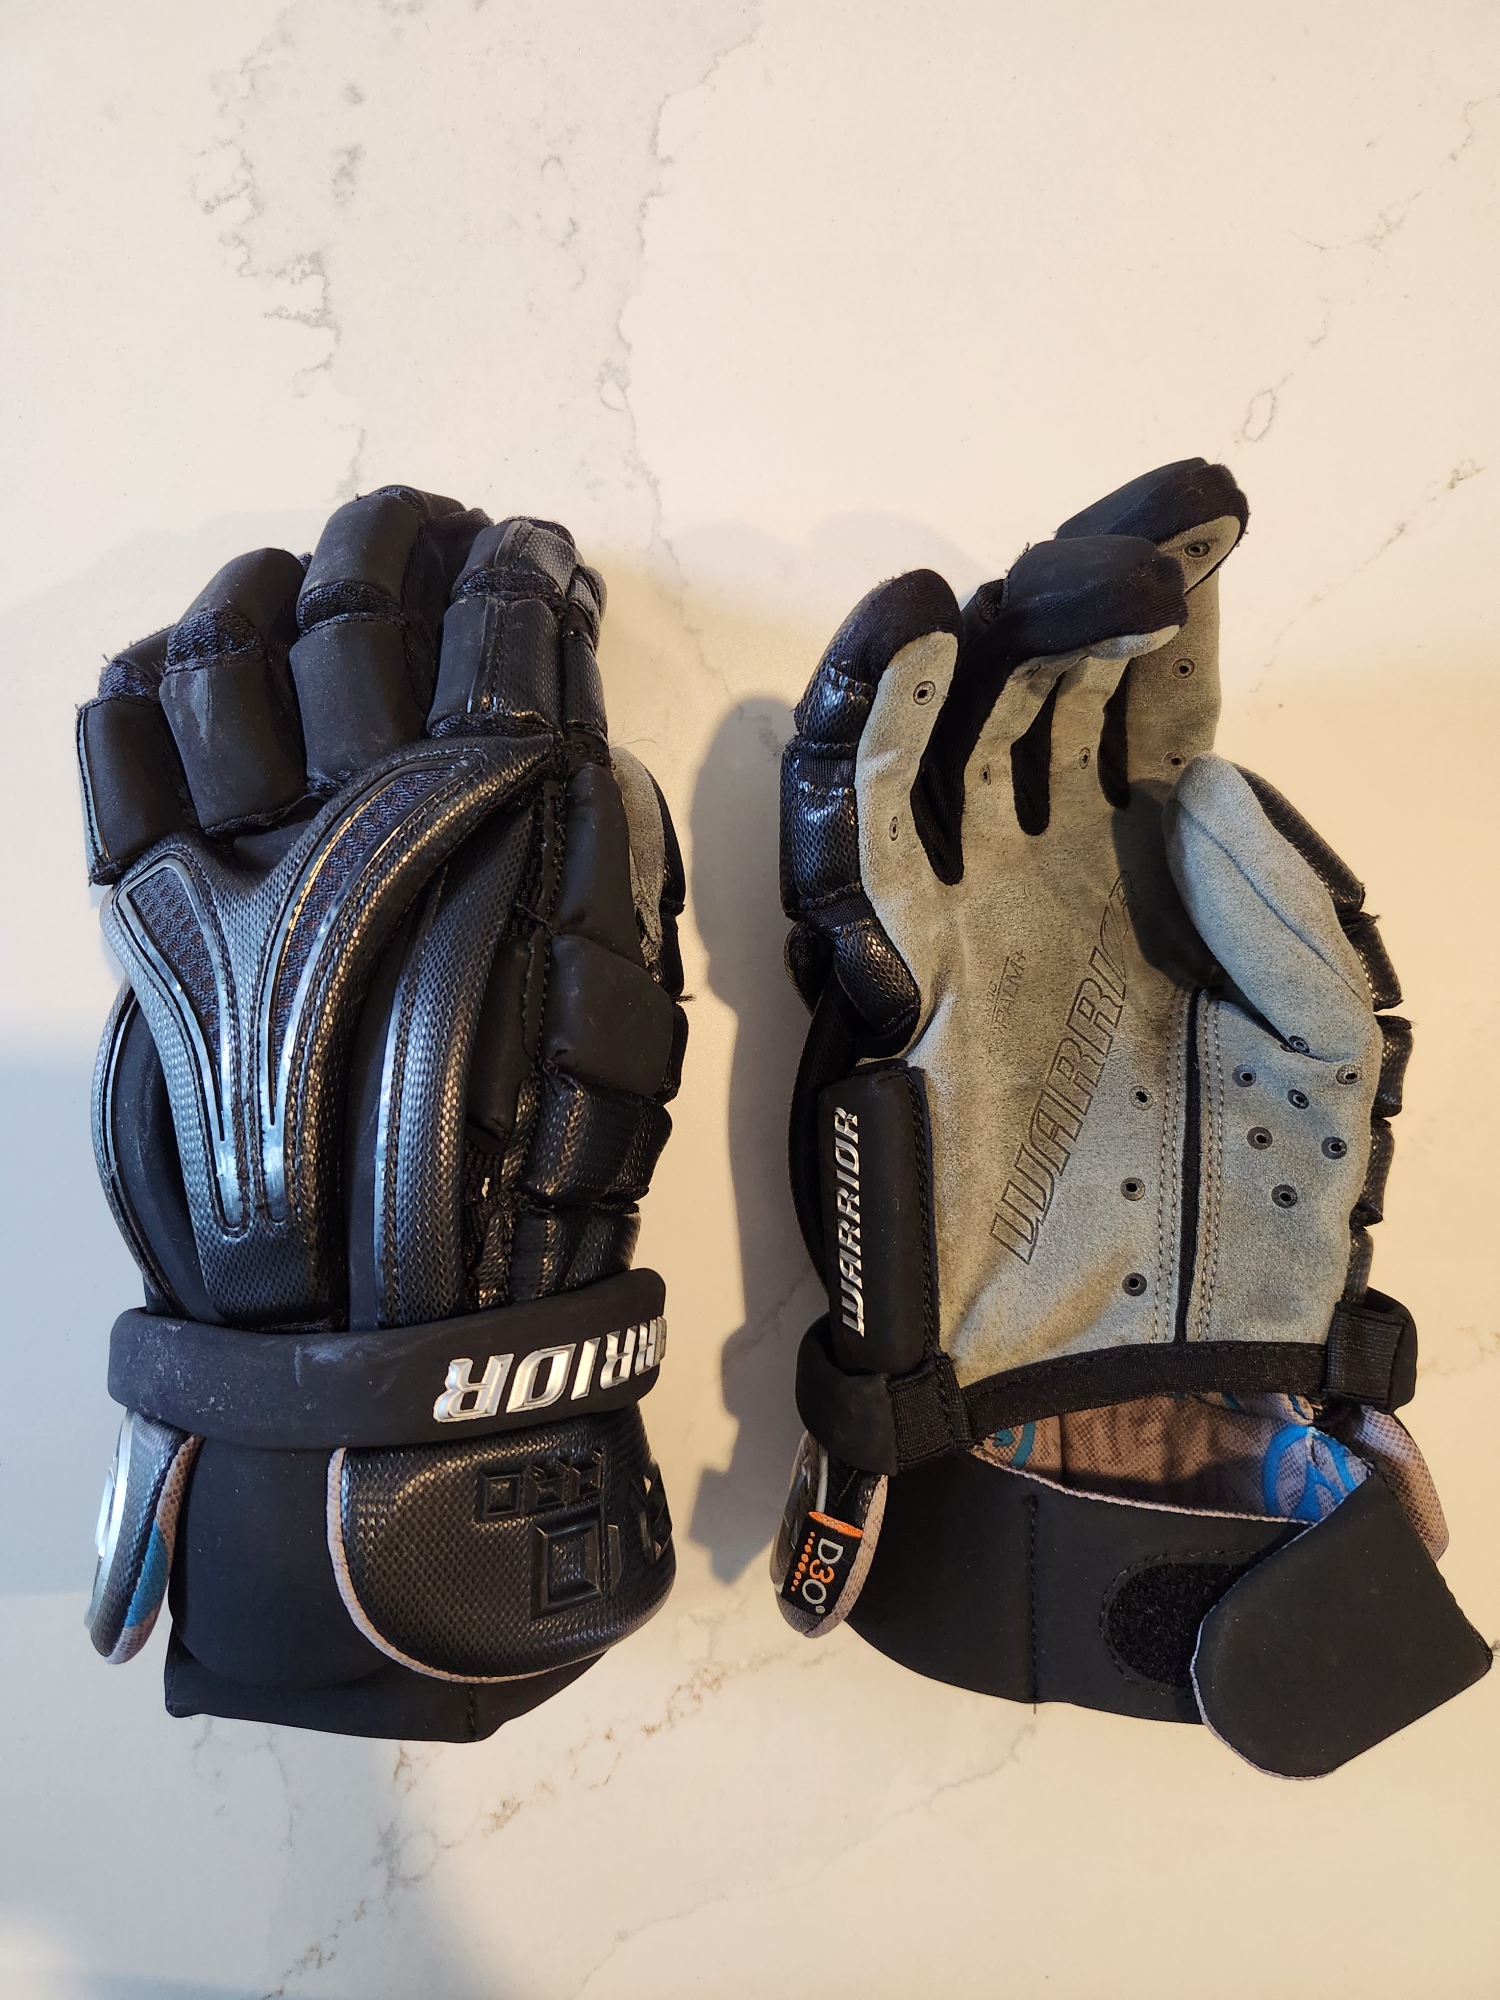 Used Player's Warrior Evo Lacrosse Gloves 13"